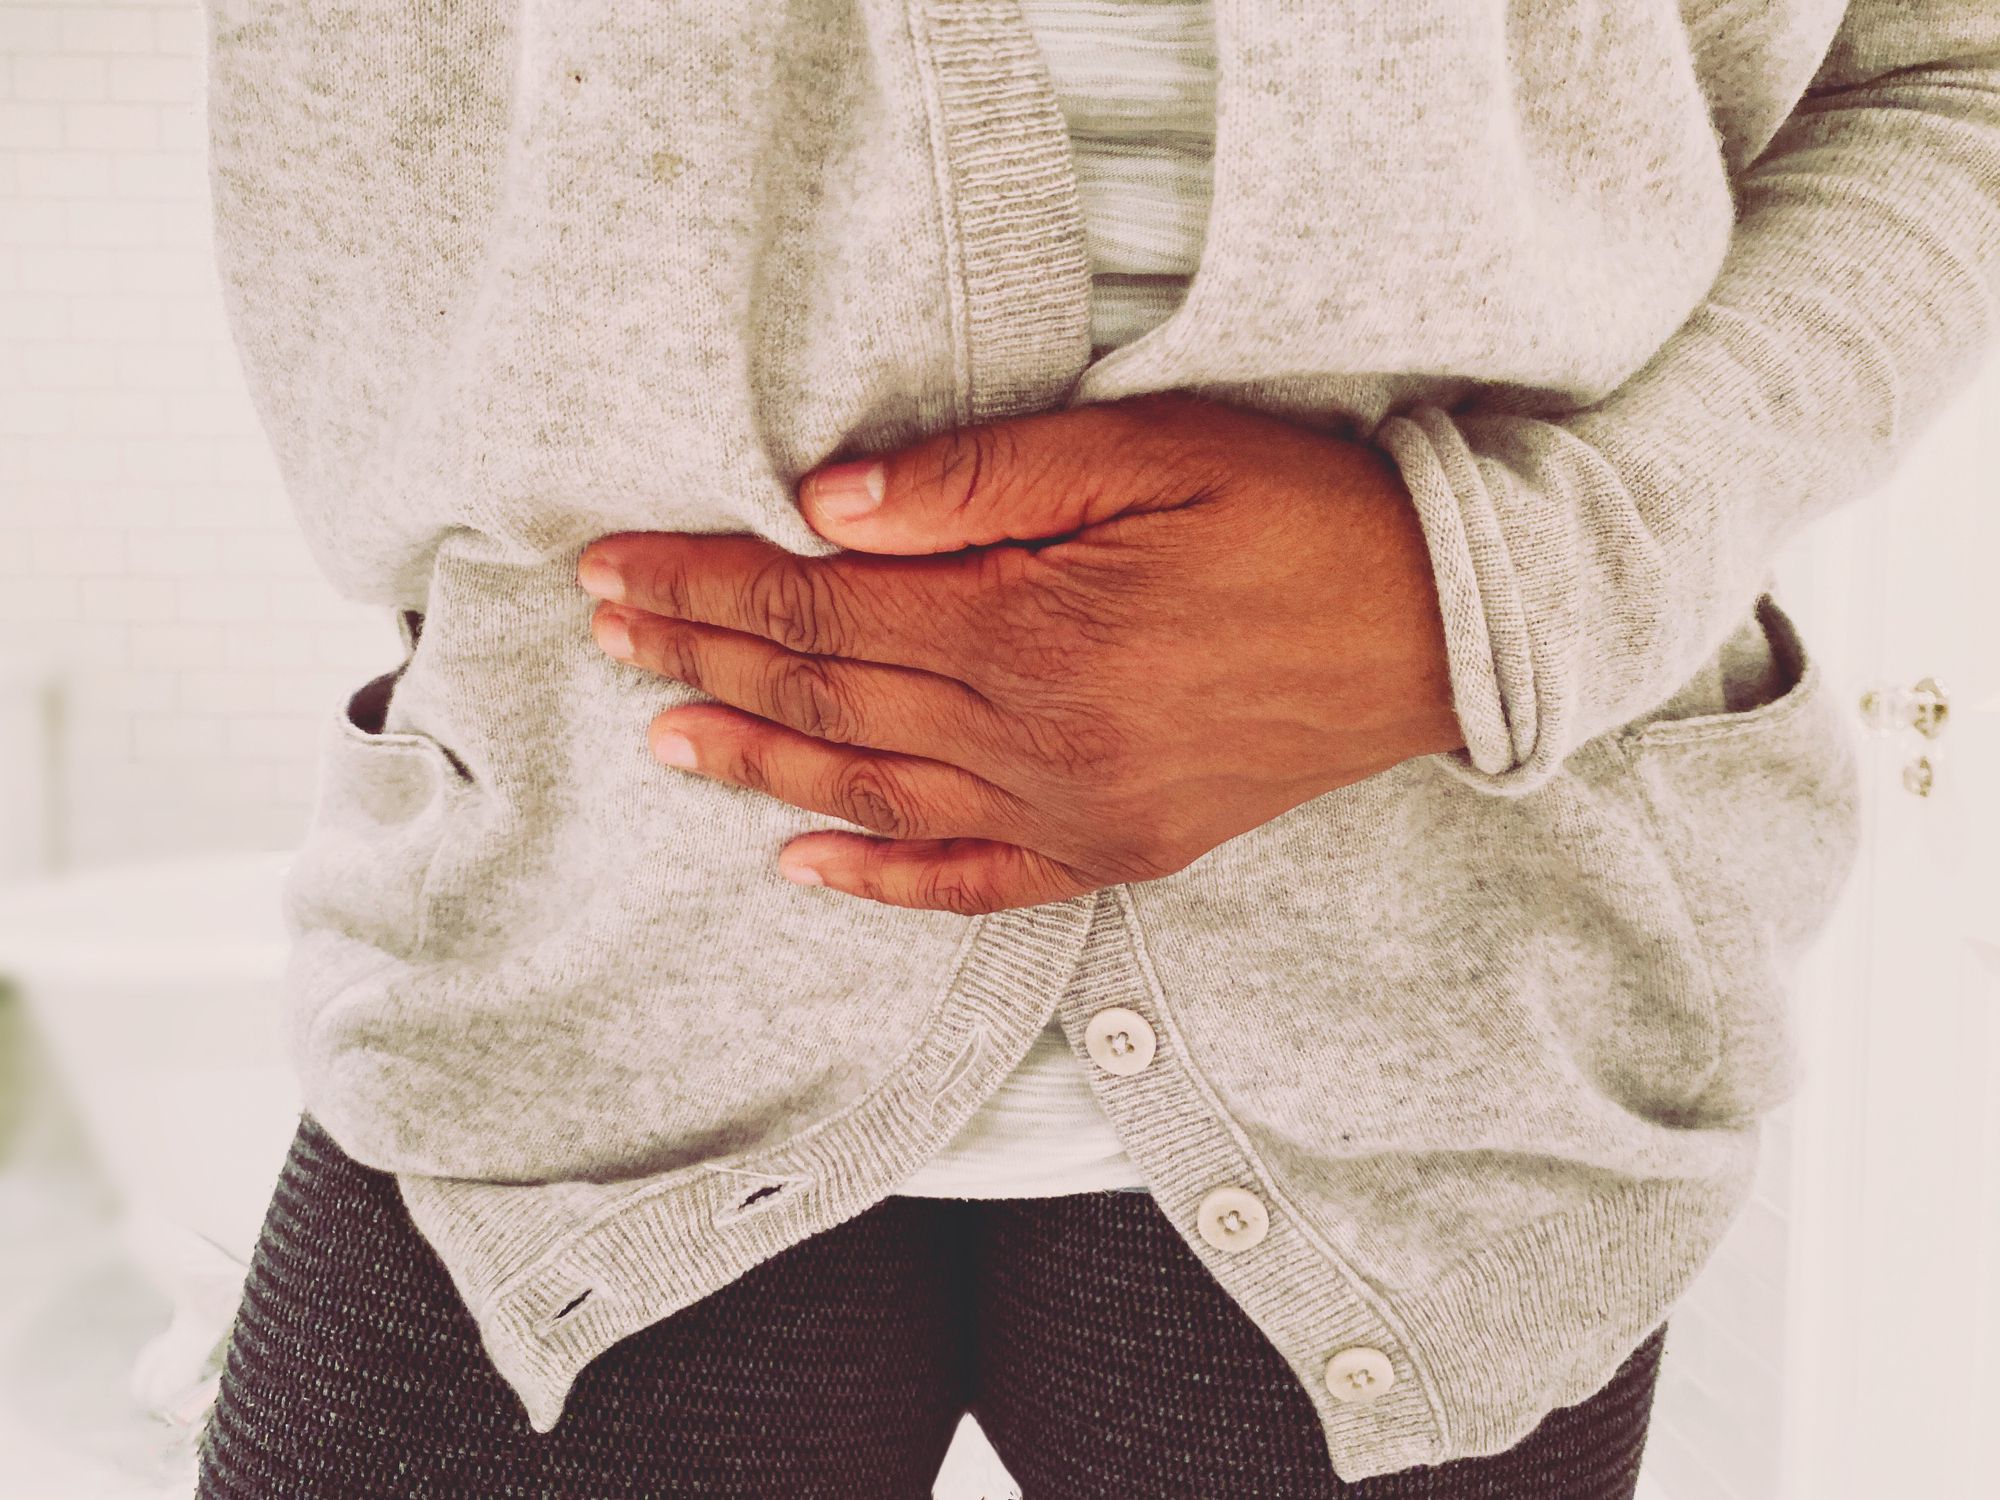 Stomach Discomfort: Common Causes and Relief